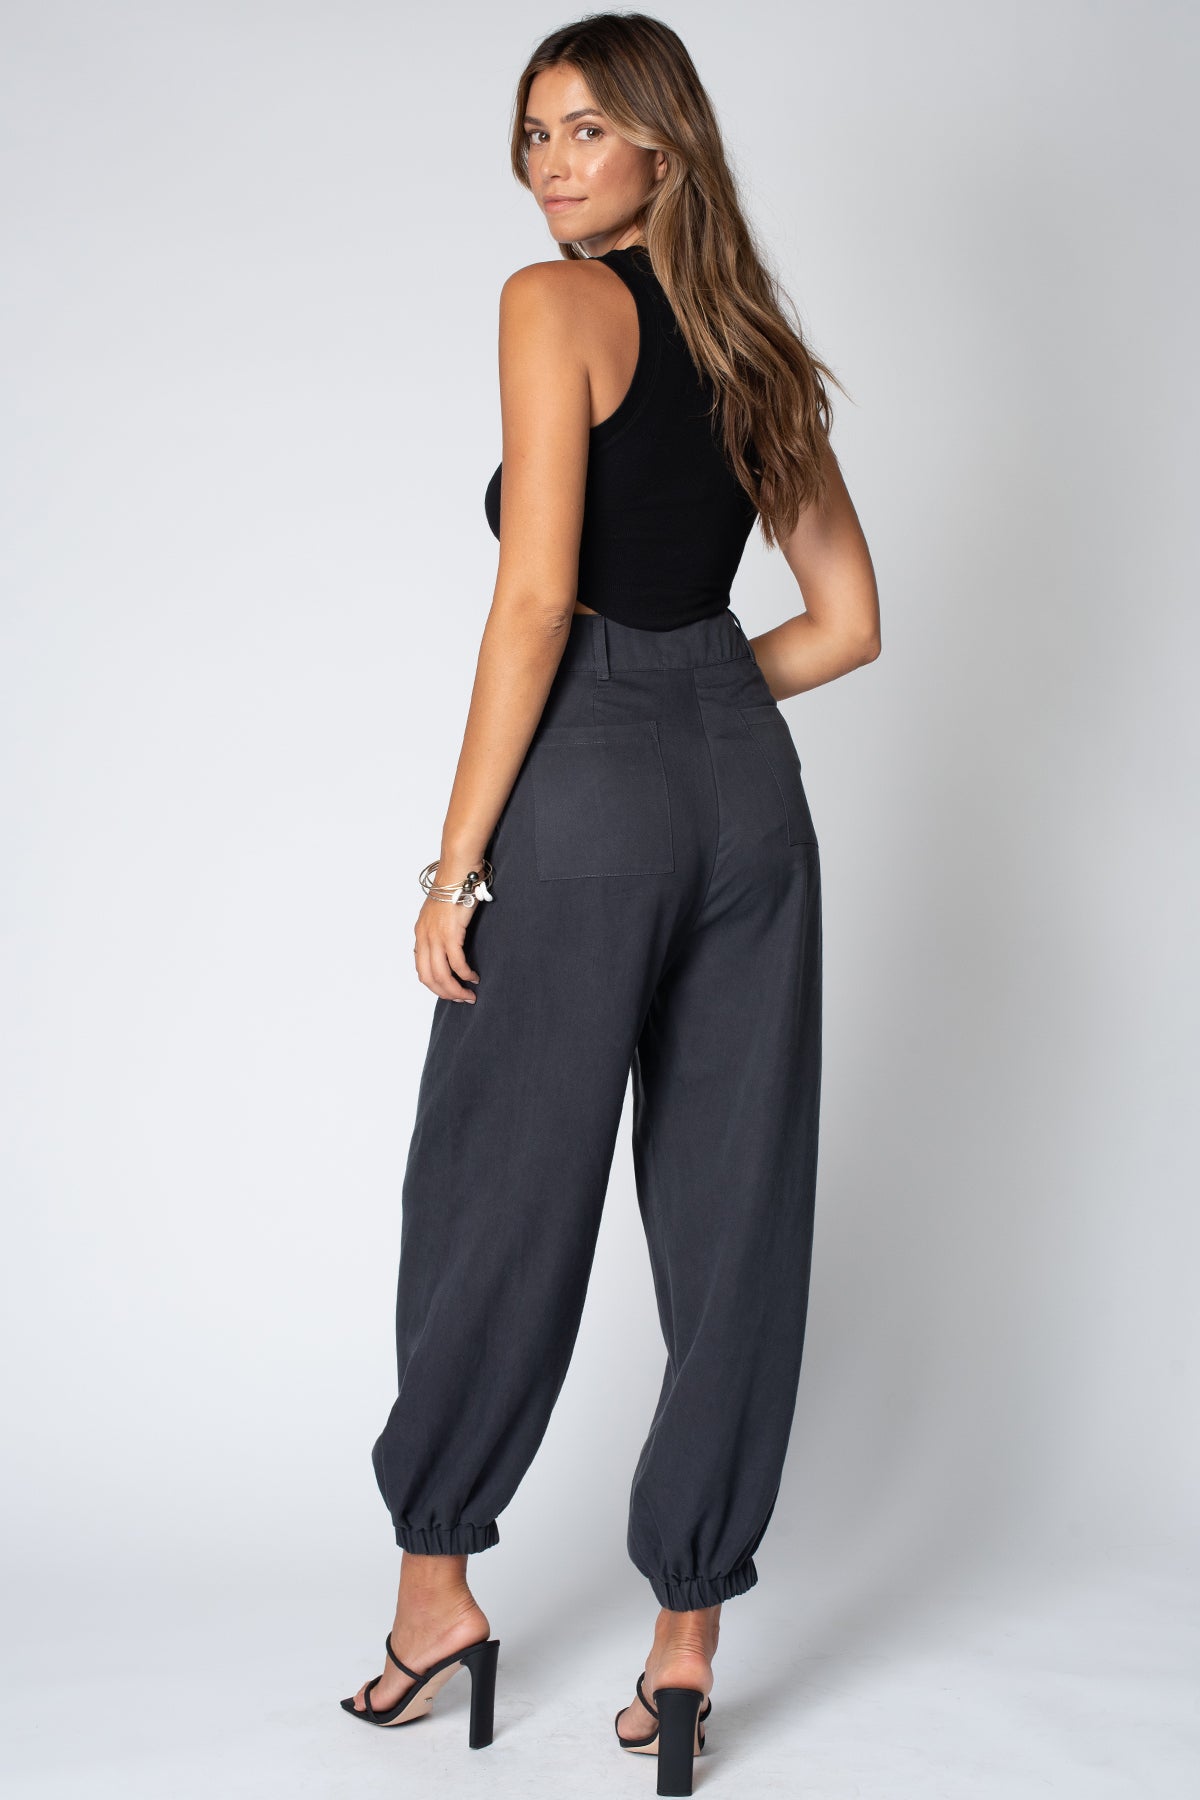 THE TWILL DYLAN PANT